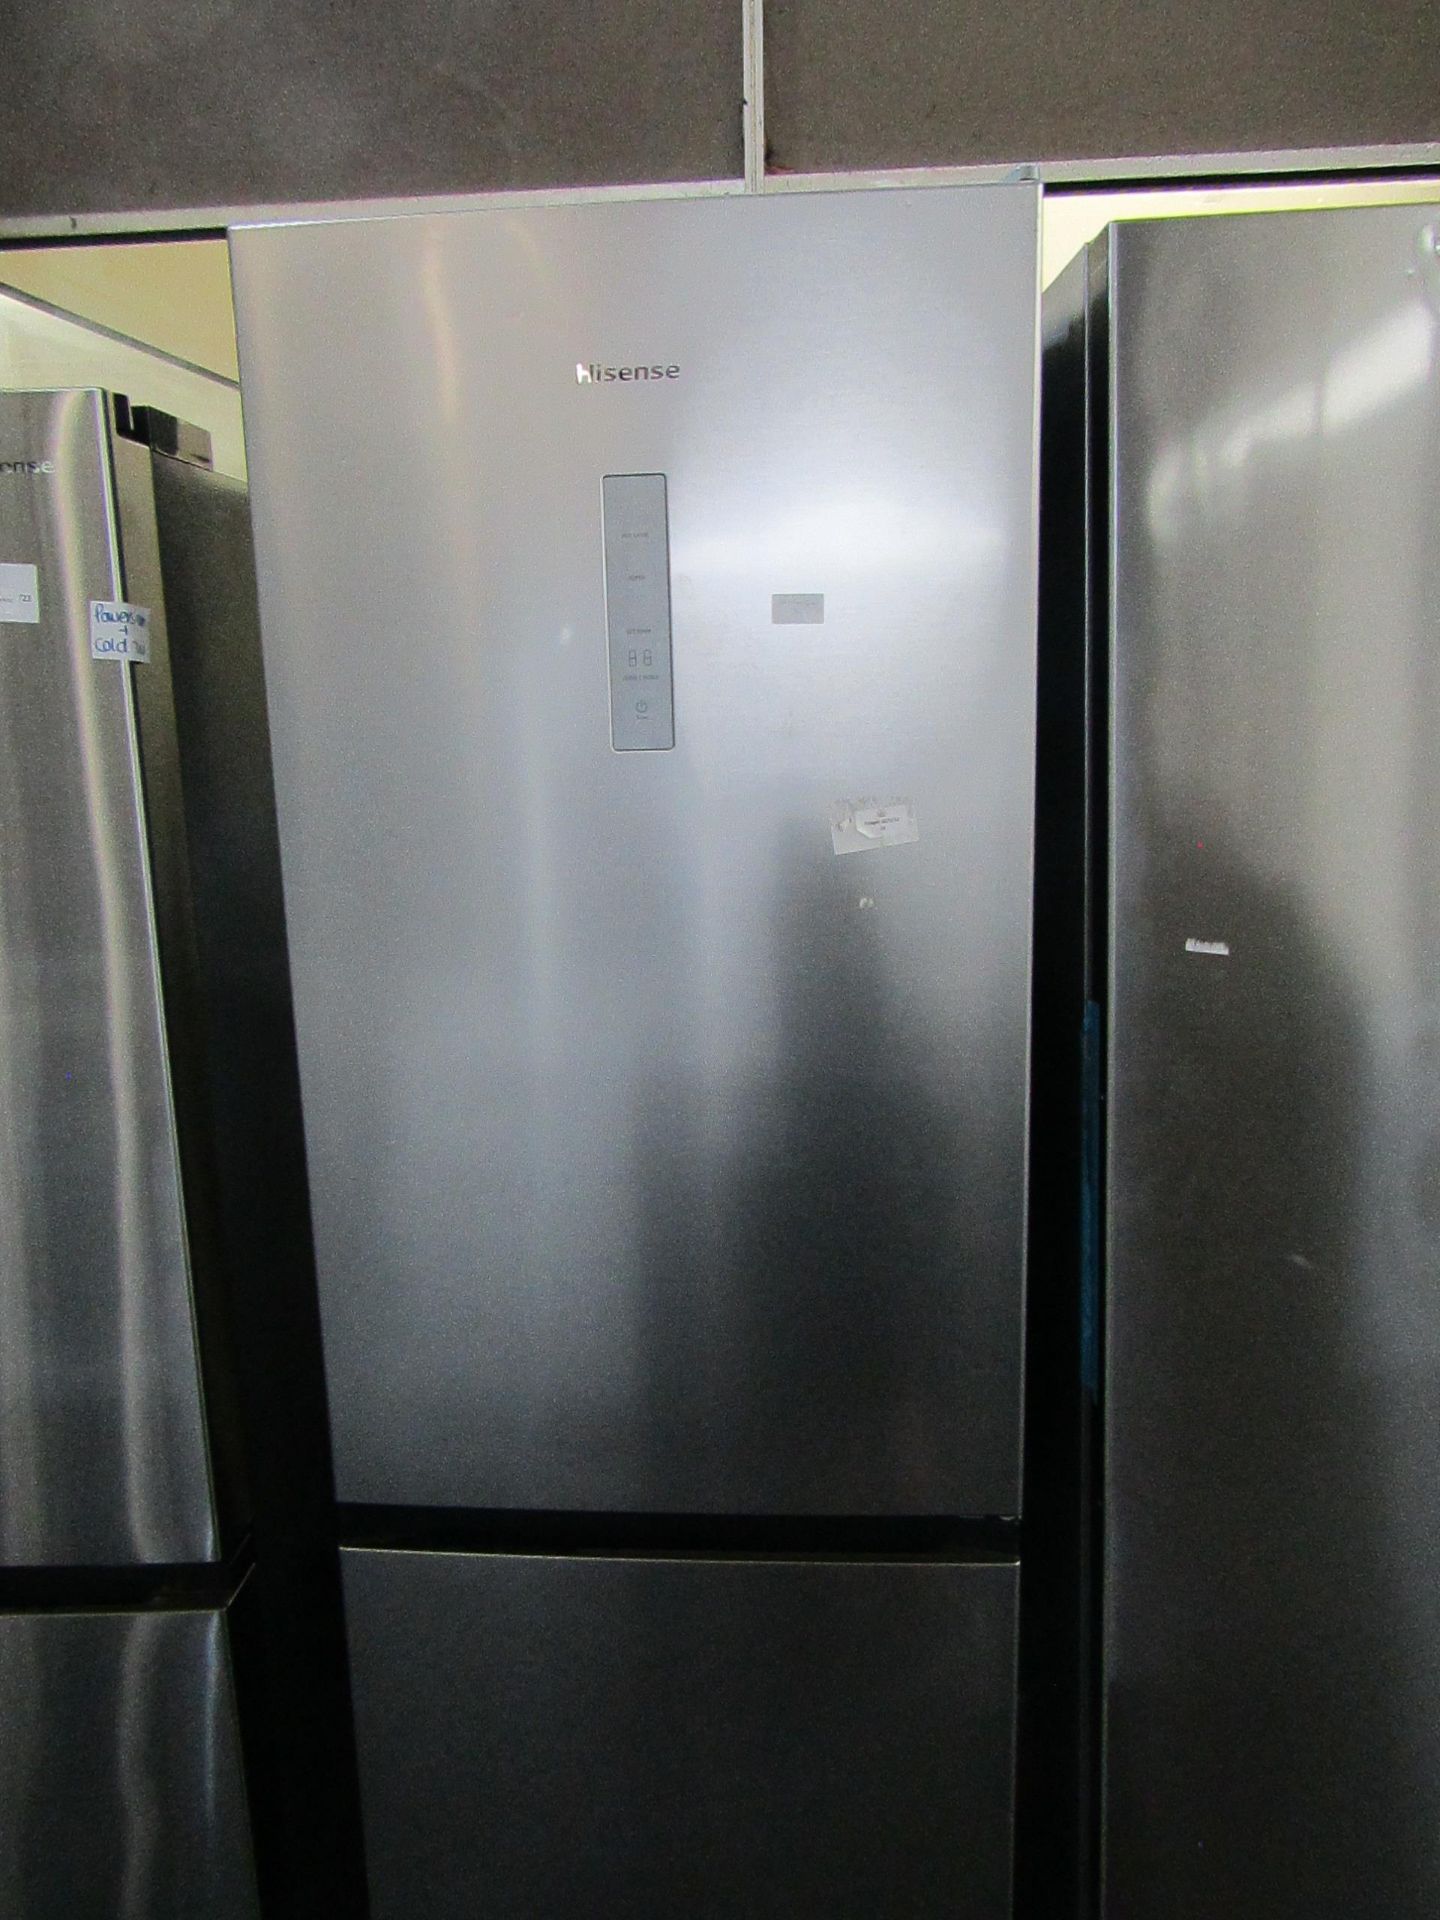 Hisense 60/40 fridge freezer, clean inside and a couple of small dents on the fridge door, tested